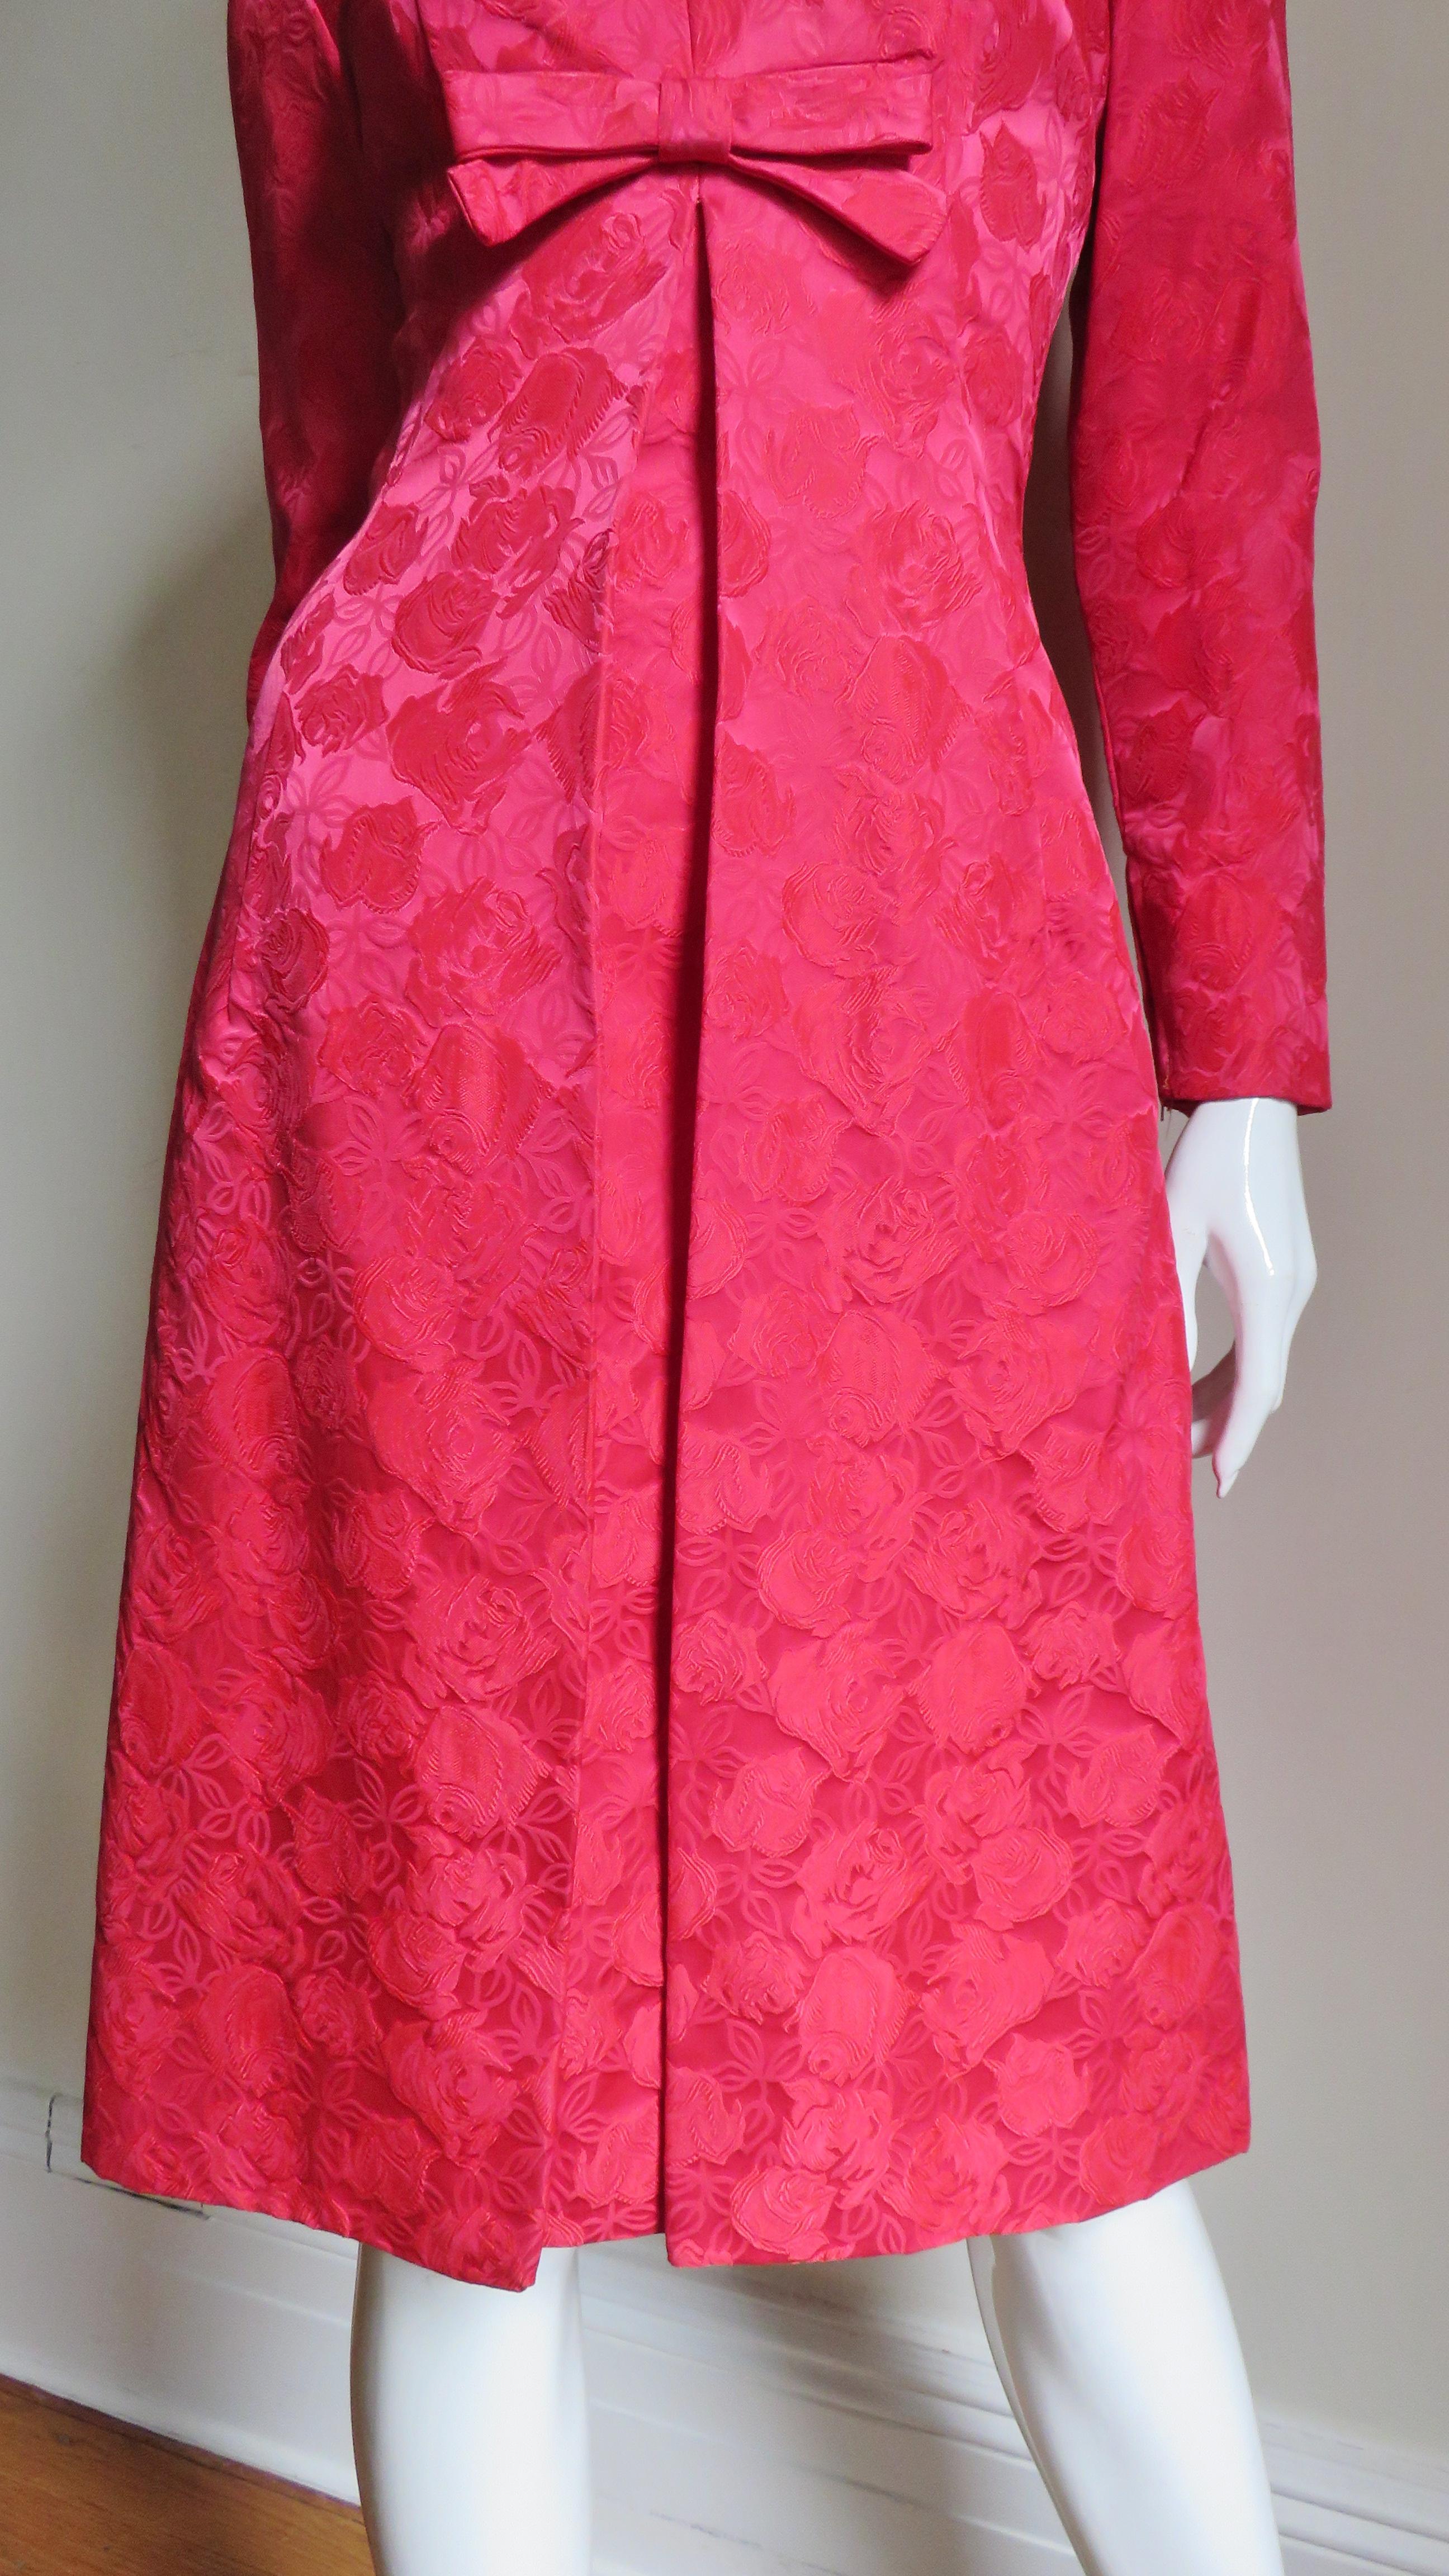 Suzy Perette New Damask Dress and Overdress 1950s 4